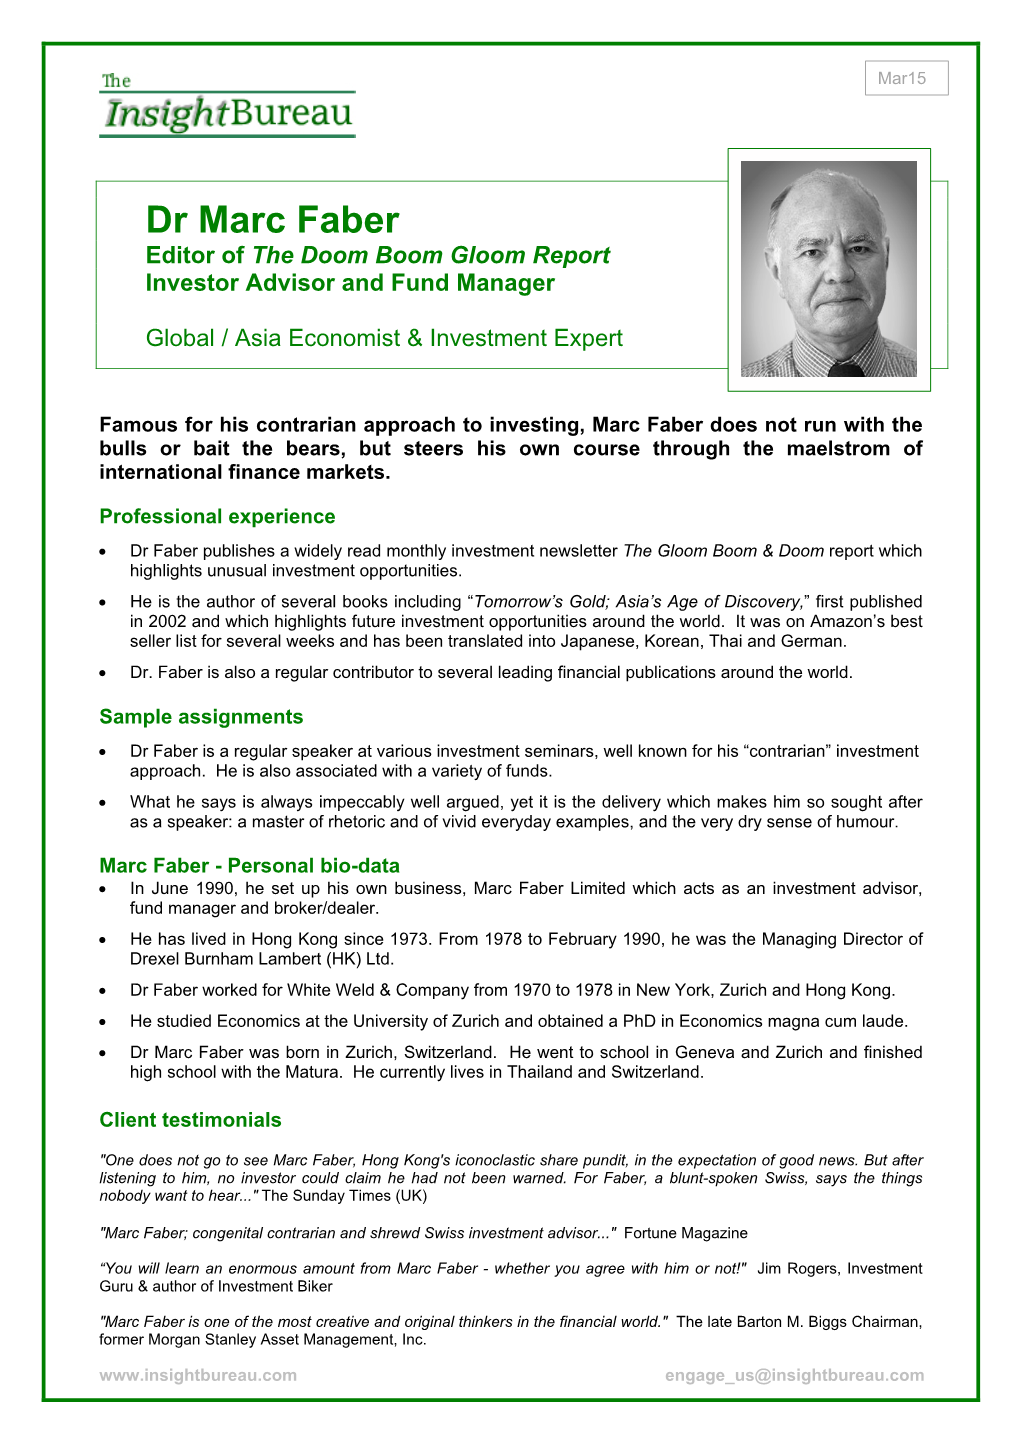 Dr Marc Faber Editor of the Doom Boom Gloom Report Investor Advisor and Fund Manager